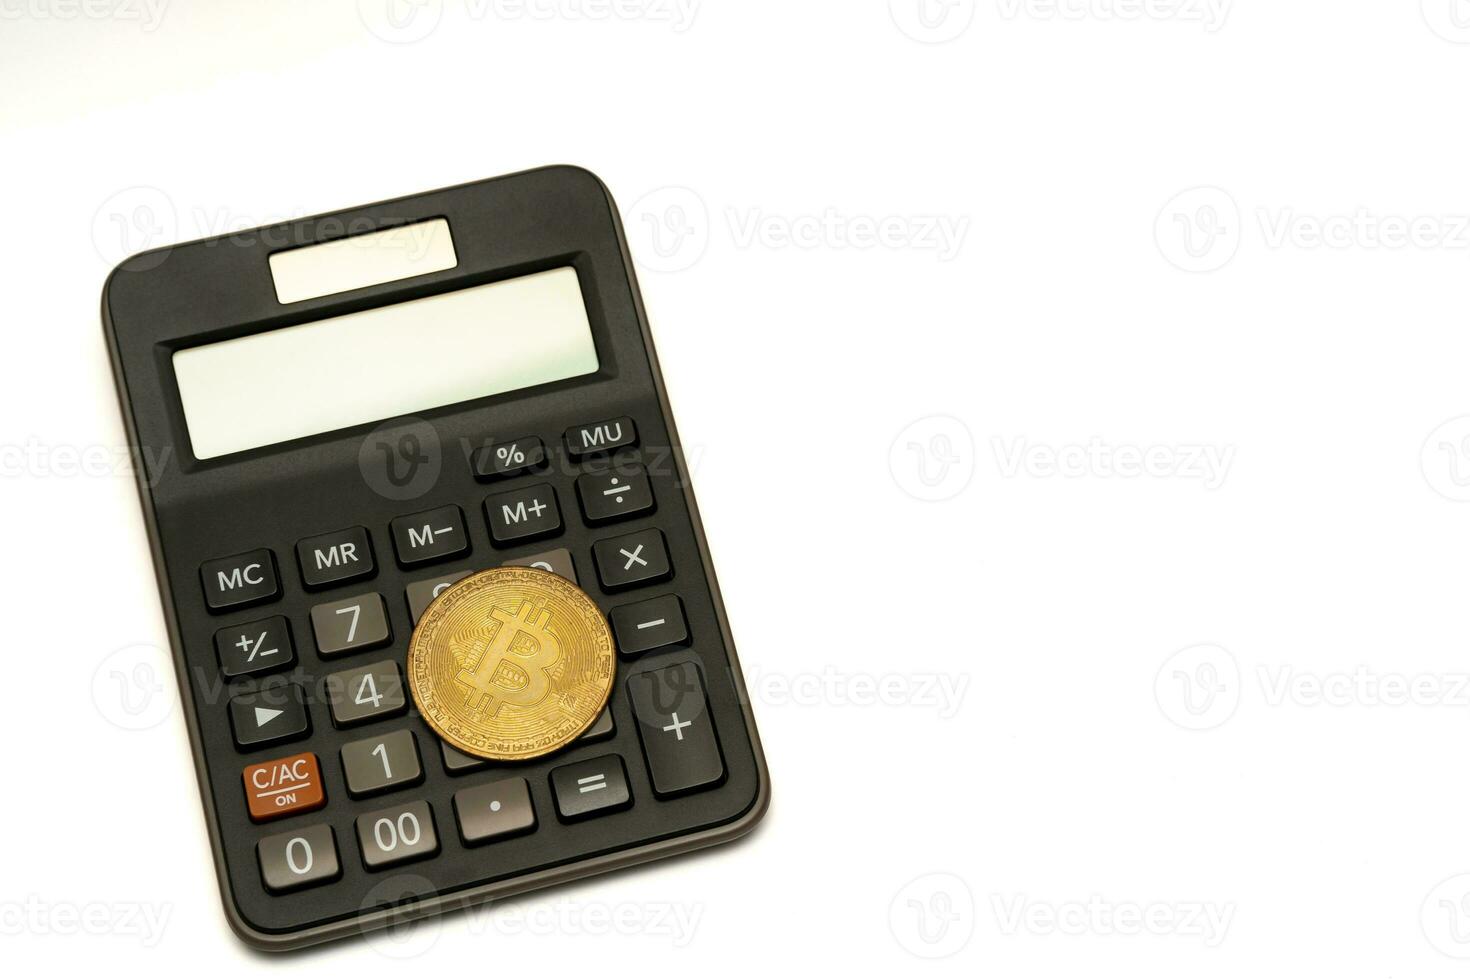 calculator and coin bitcoin isolated on white background, calculation of profitability. photo